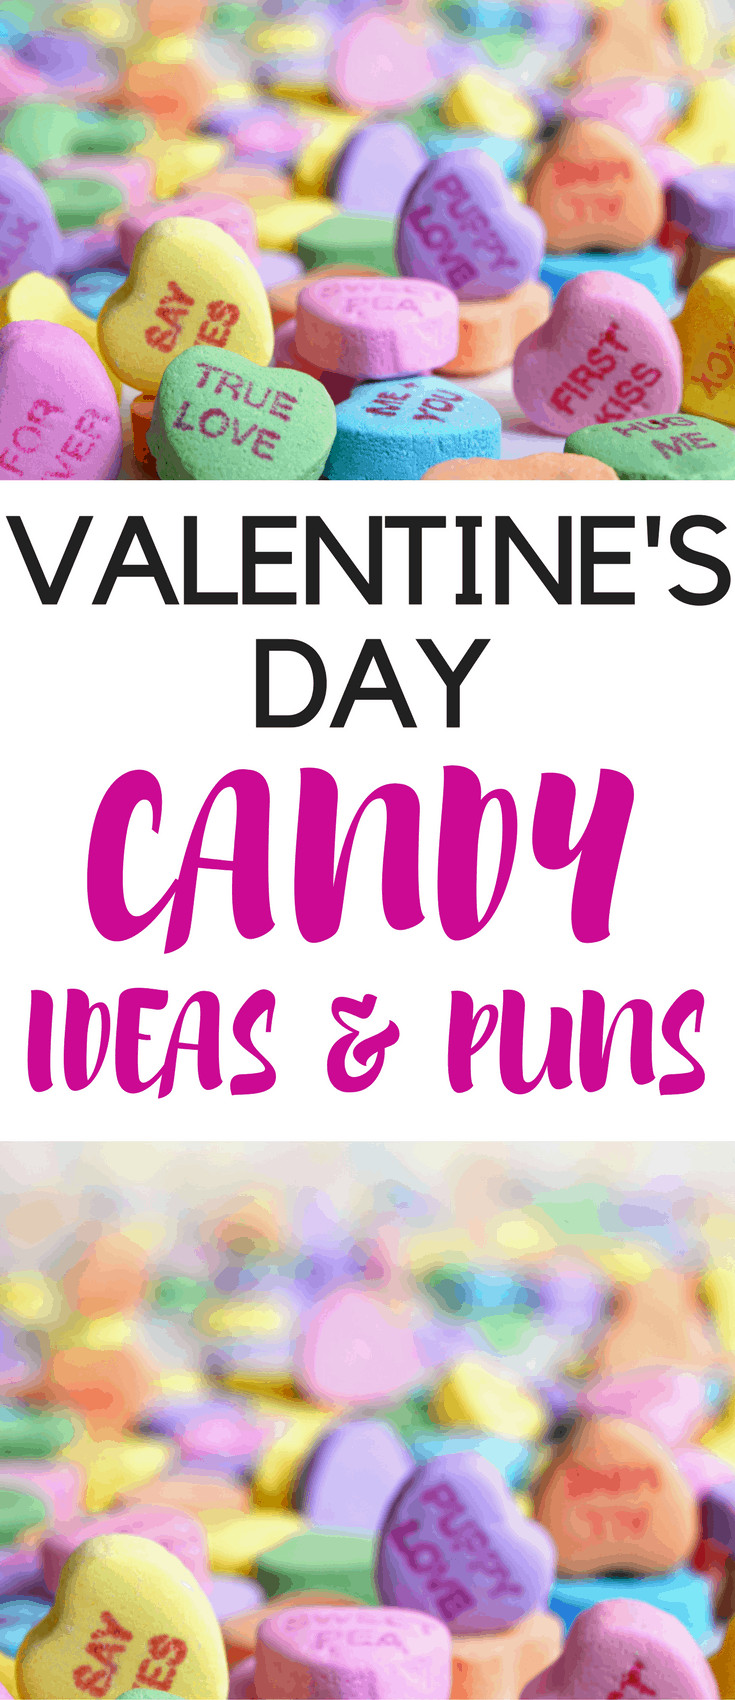 Candy Puns For Valentines Day
 Valentine s Day Candy Gift Ideas and Puns Casey La Vie